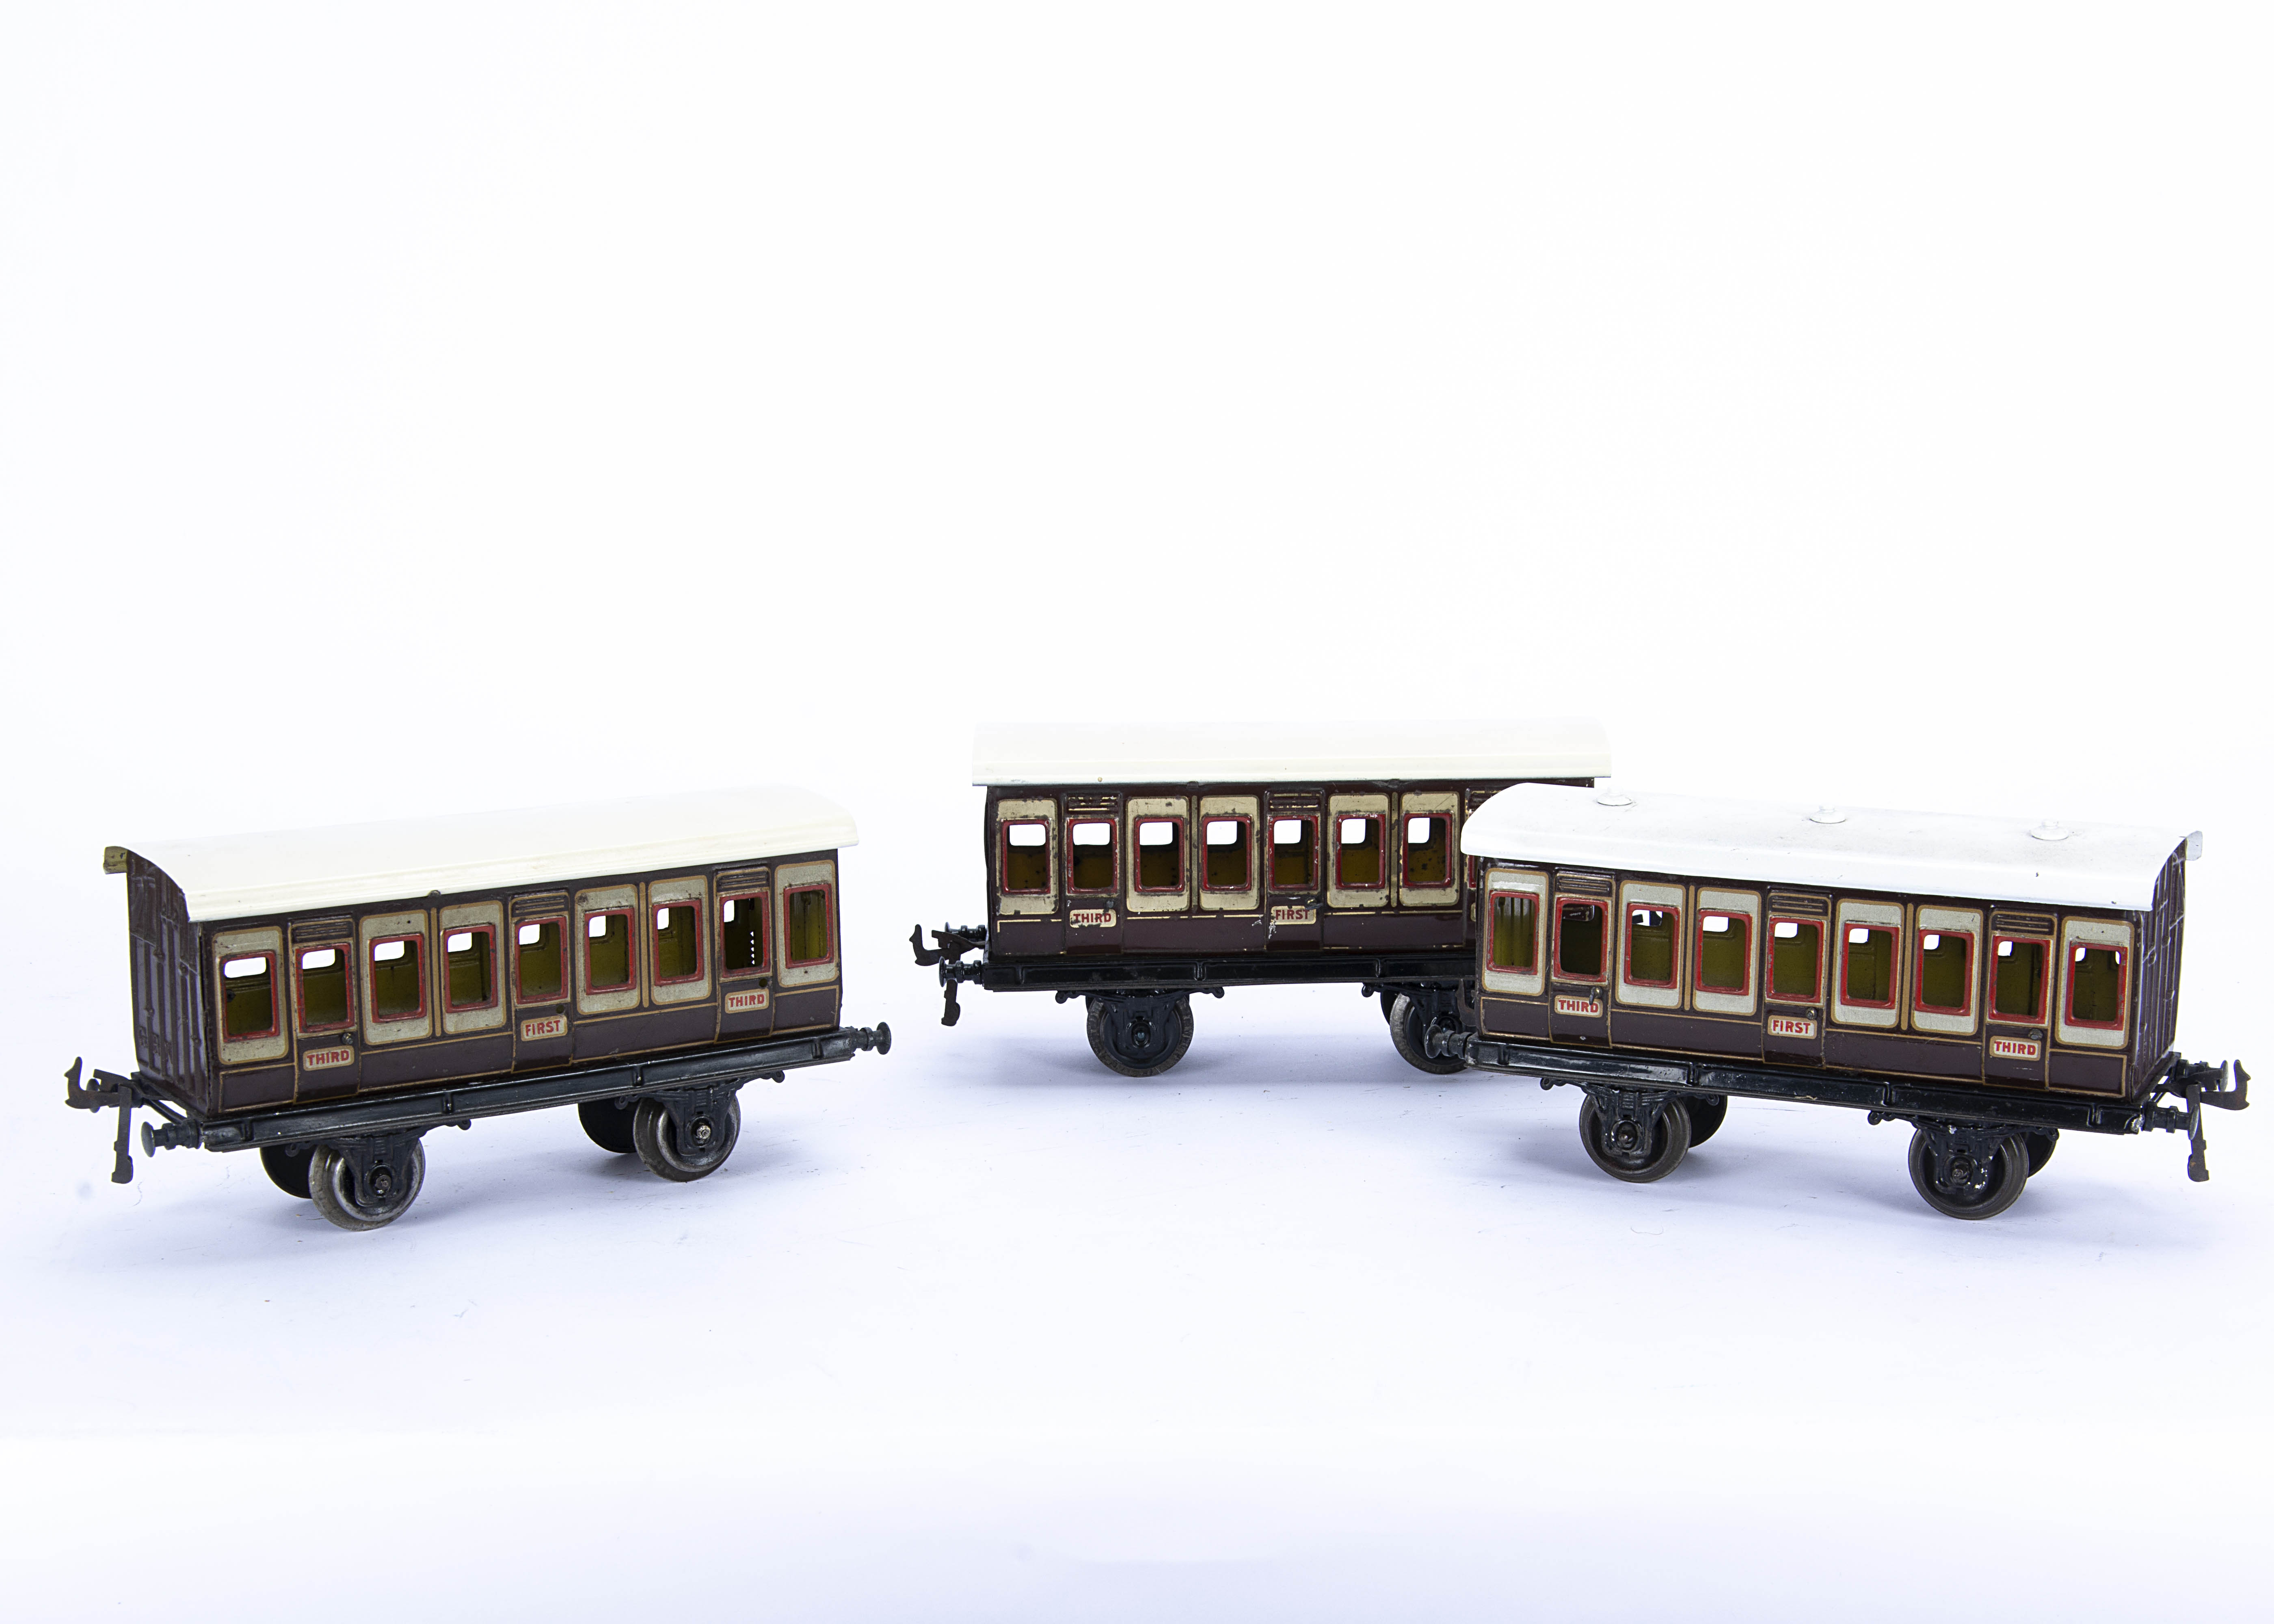 Three early Bing Gauge 1 LNWR Four-wheeled Coaches, circa 1912, in LNWR plum and ivory with 'GBN'